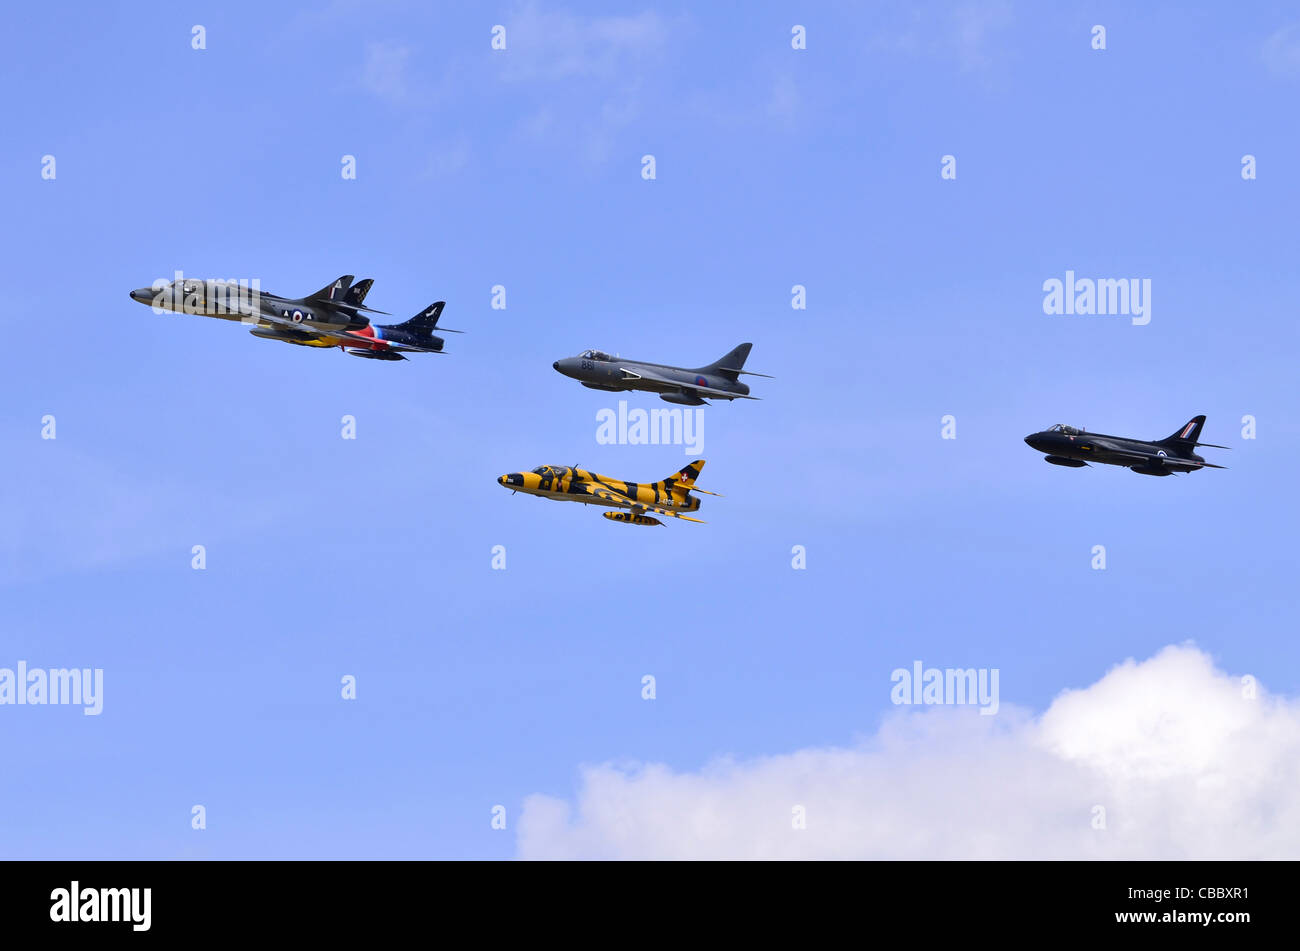 Hawker Hunter formation flypast at RAF Fairford, UK. Stock Photo